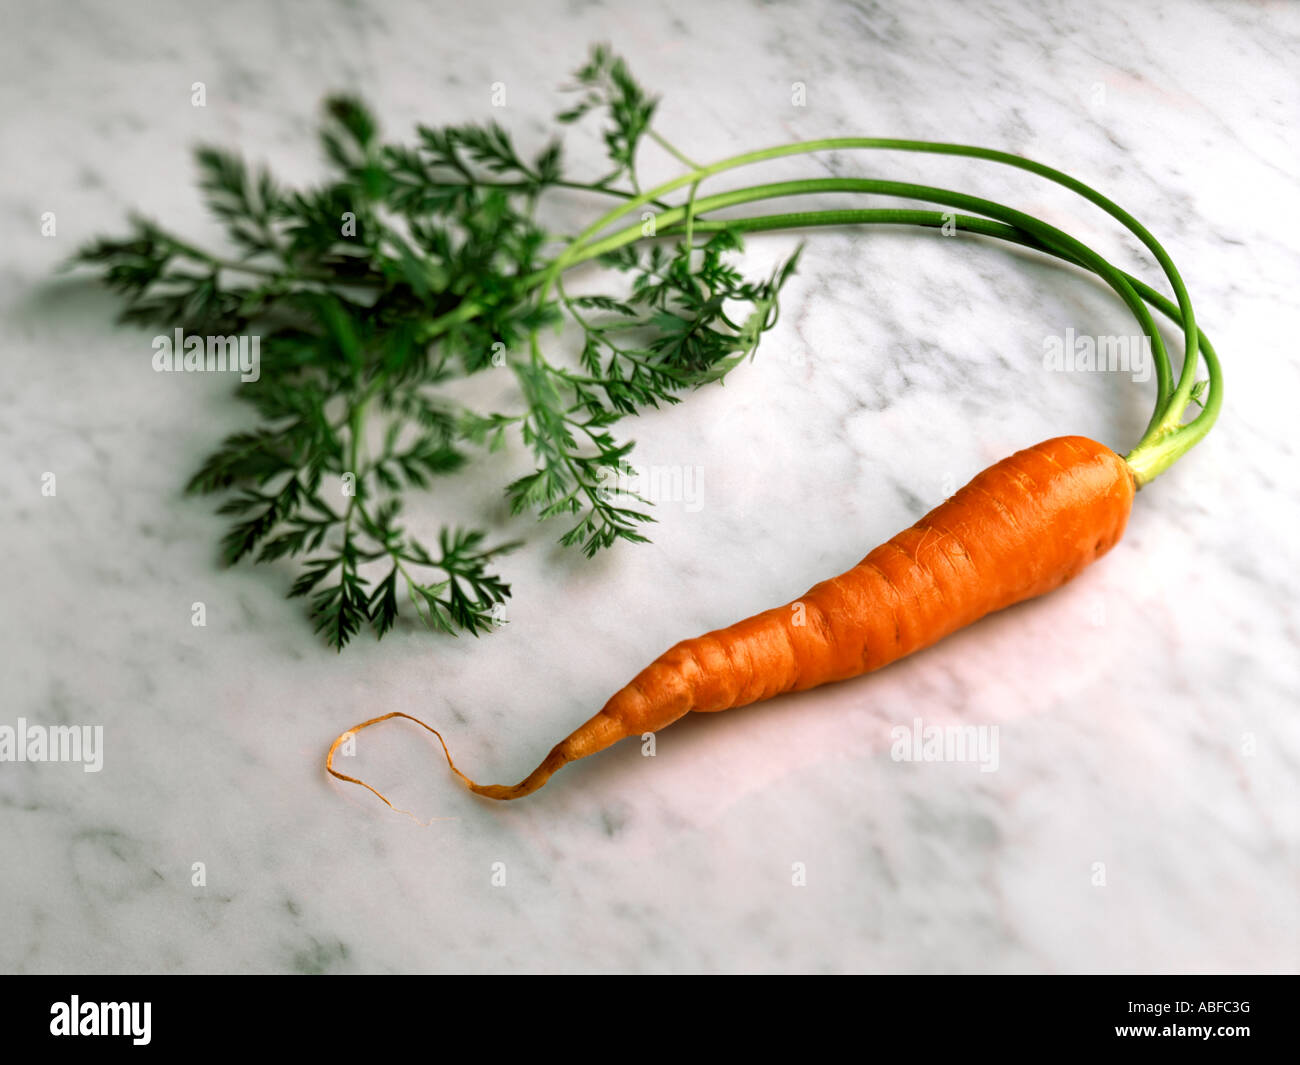 SINGLE FRESH CARROT WITH A GREEN TOP Stock Photo